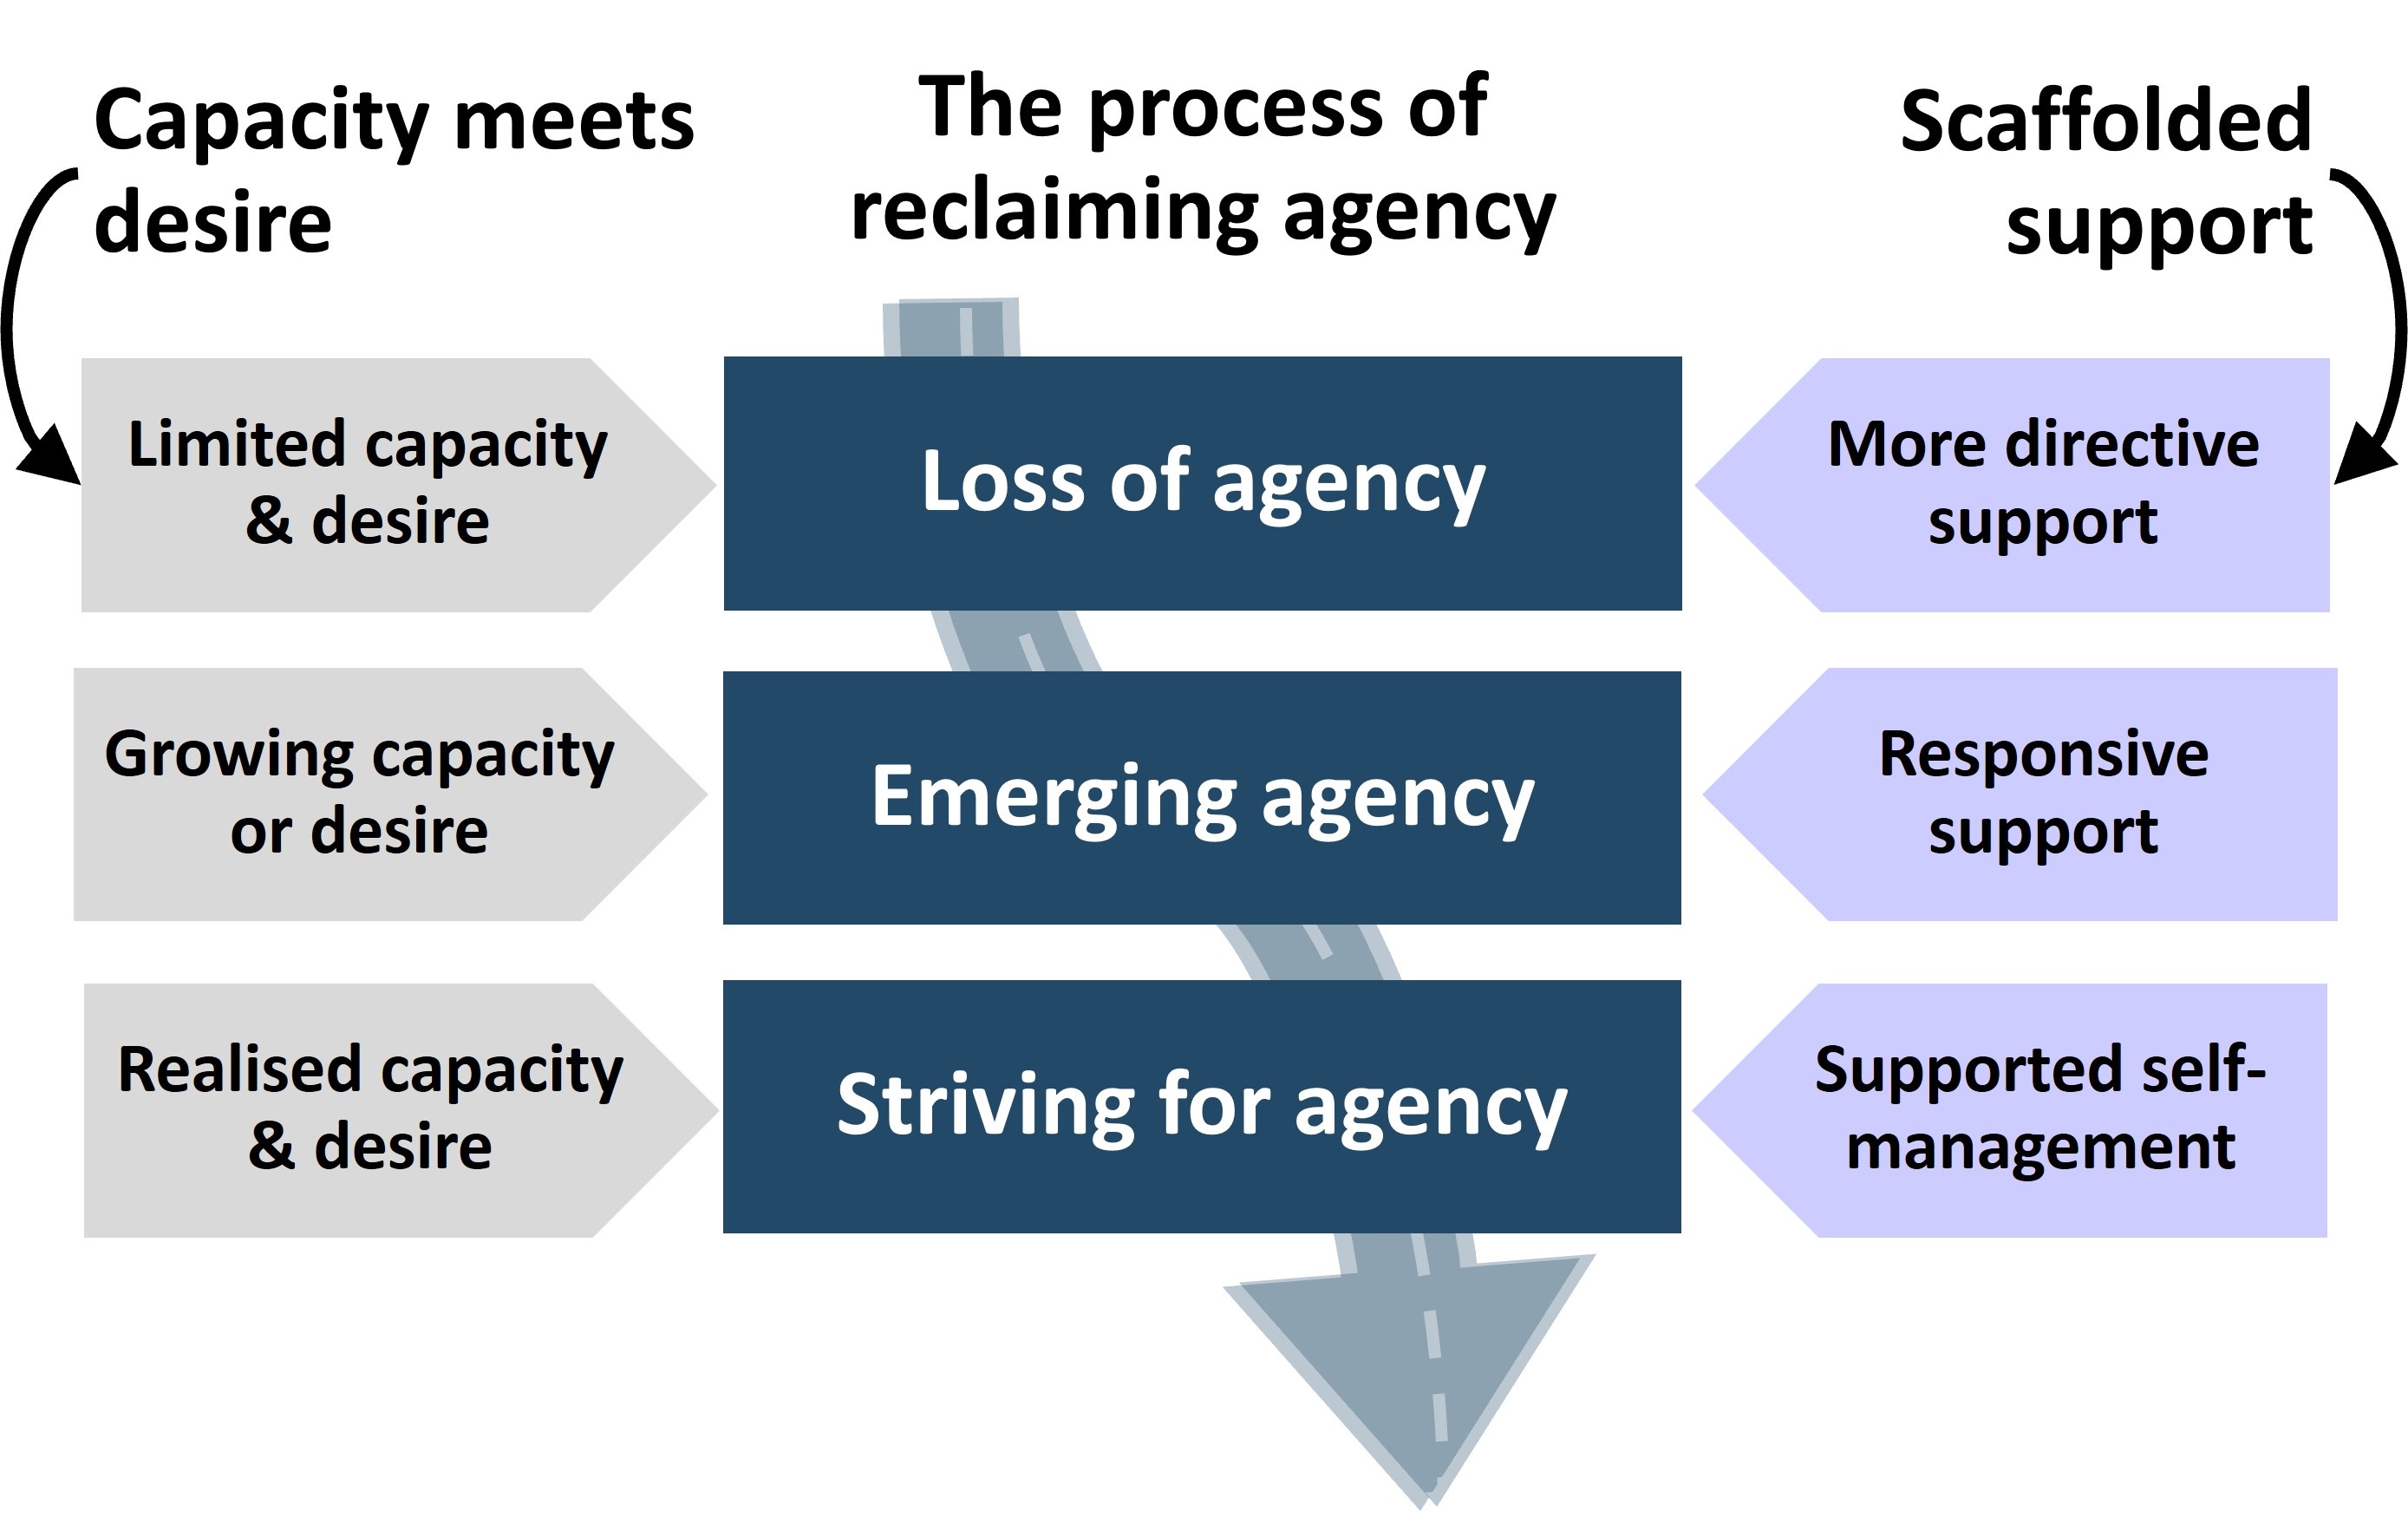 Diagram of the model developed by researchers, with 3 columns "capacity meets desire" on the left; "The process of reclaiming agency" in the middle; and "Scaffolded support" on the right. Underneath are 